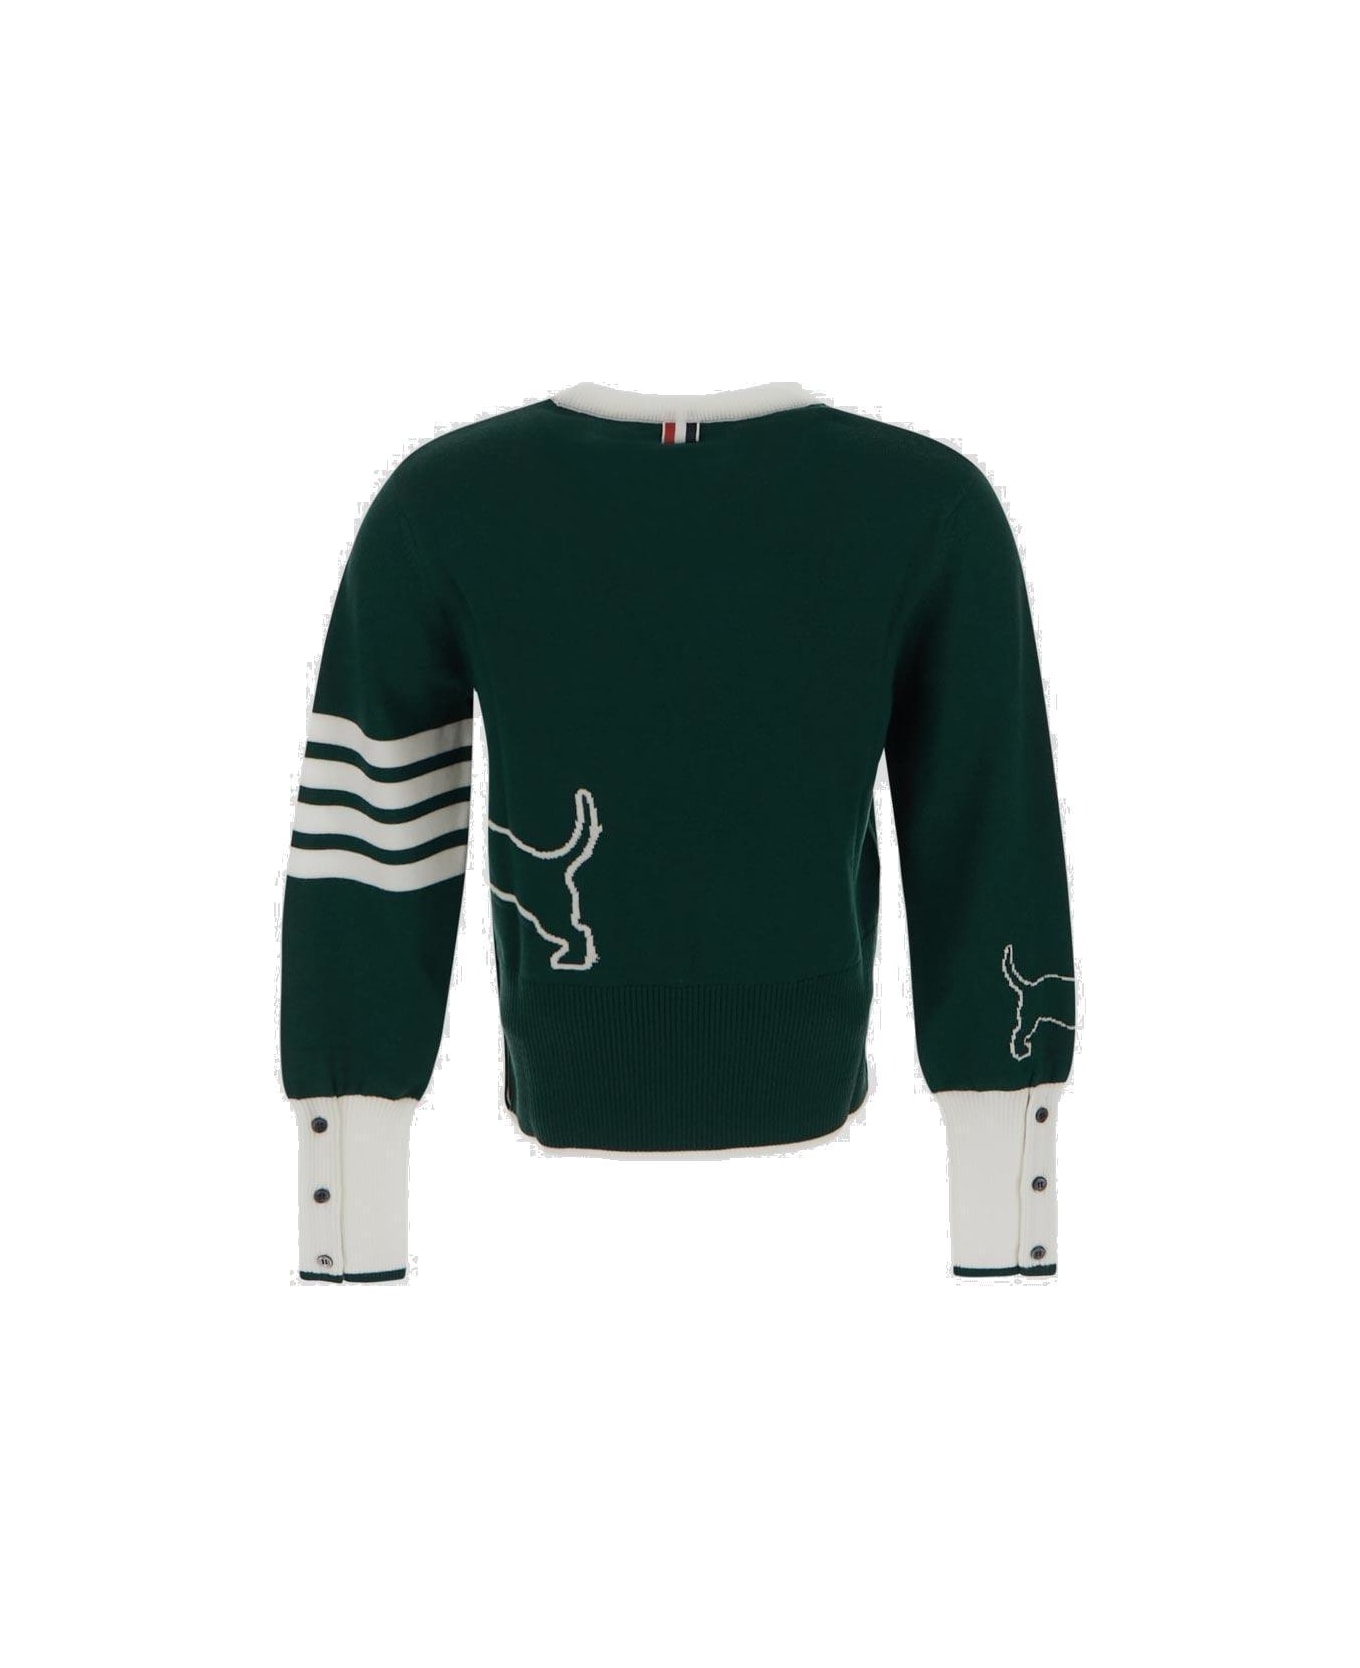 Thom Browne Long-sleeved Crewneck Knitted Jumper - Green